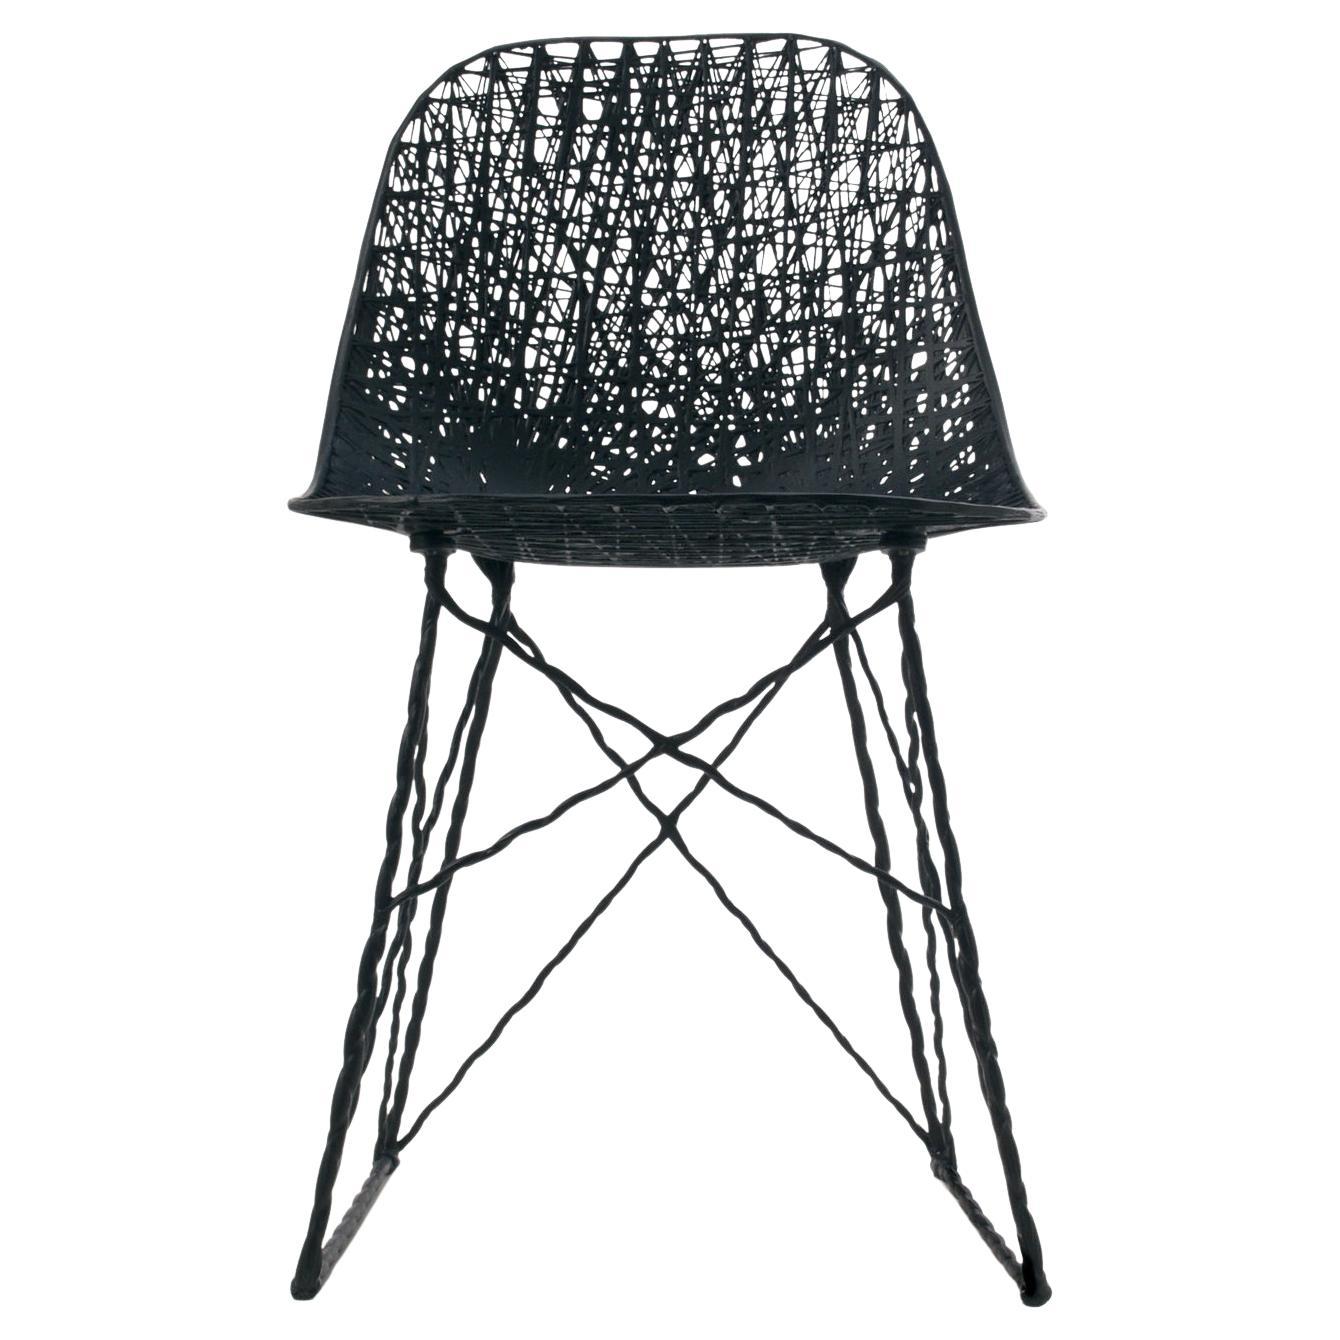 Moooi Carbon Chair in Black Fiber with Epoxy Resin by Bertjan Pot